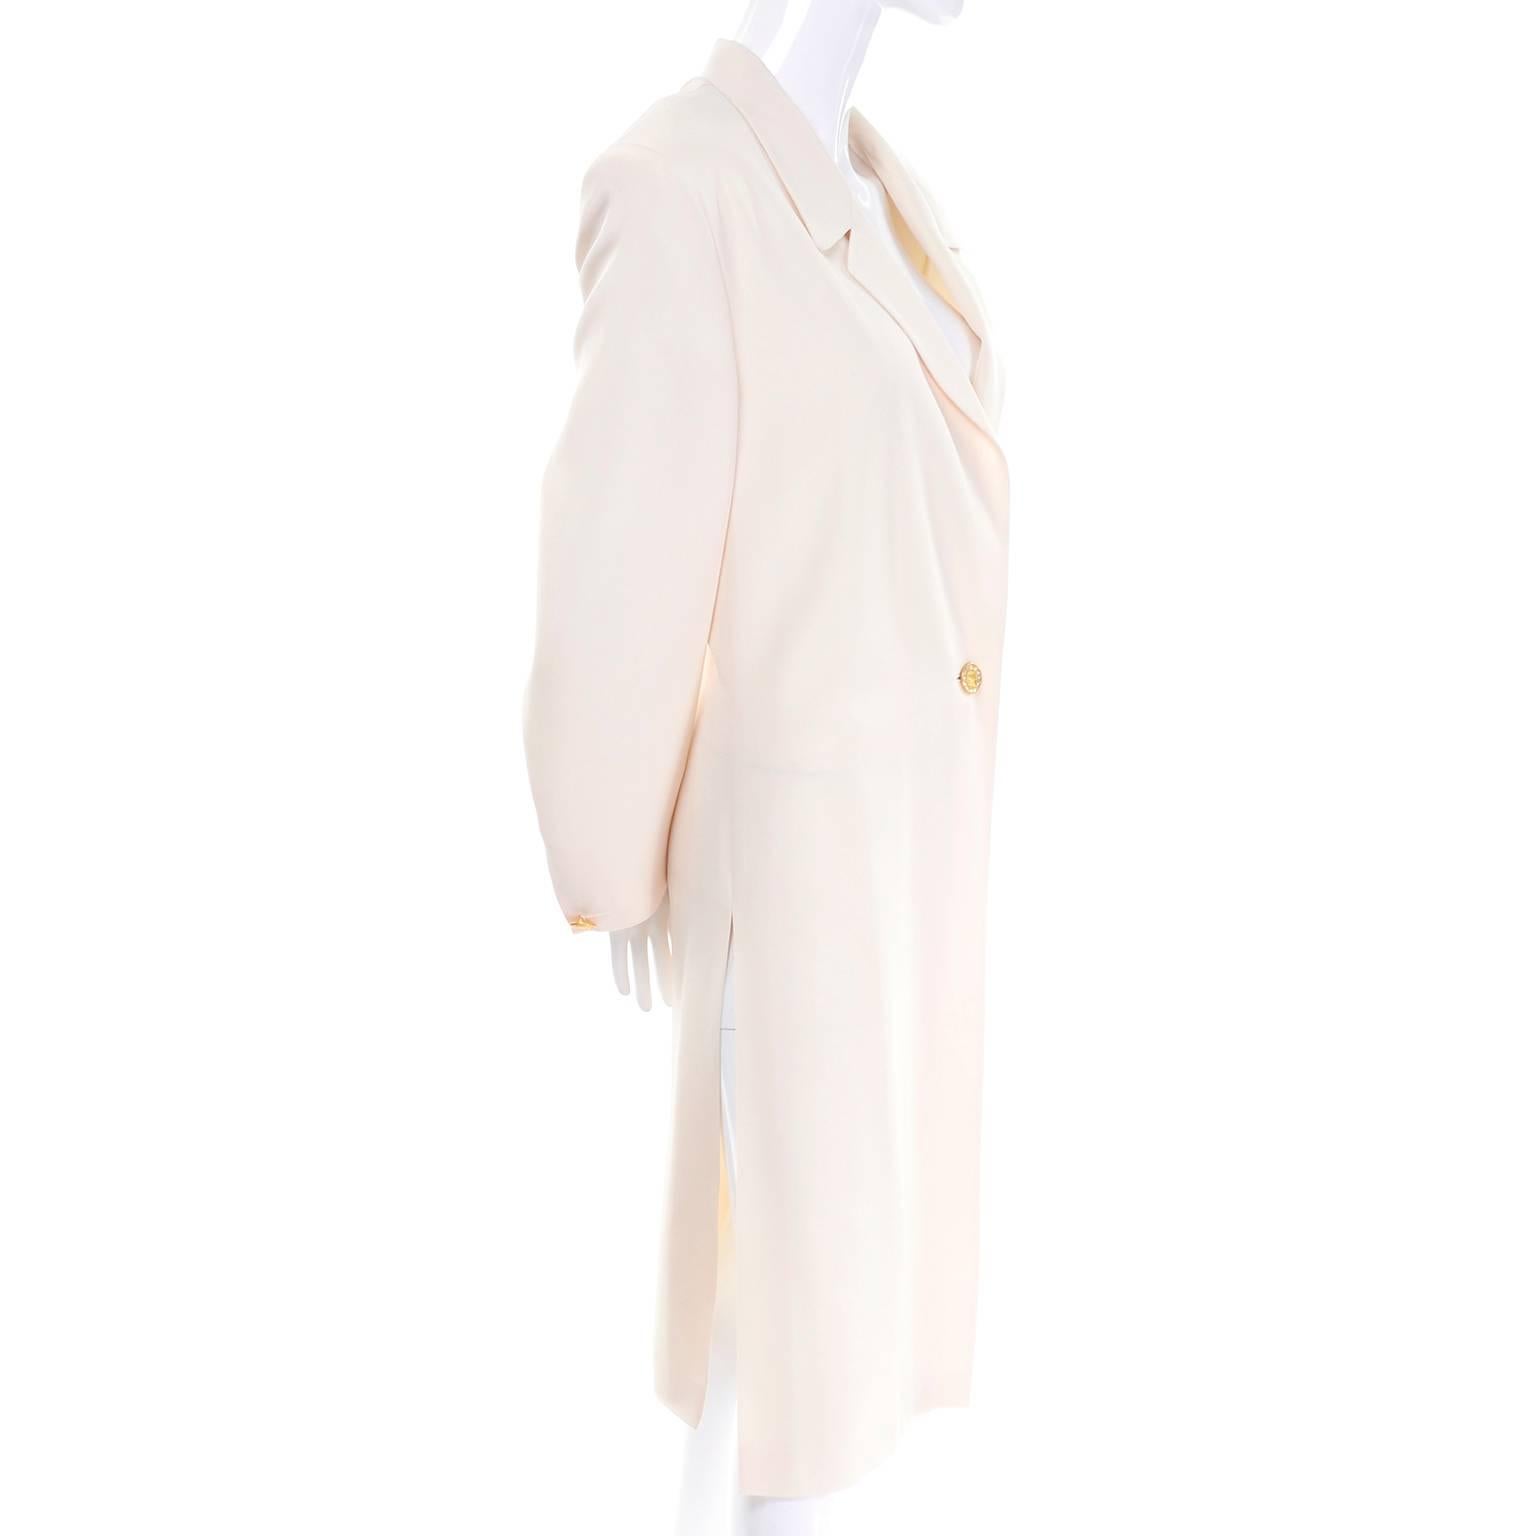 The photographs just don't show how beautiful this incredible Escada evening coat is in person!  We have quite a few Escada vintage items for sale on 1stdibs right now from an estate we acquired recently.  This beautiful Escada couture creamy ivory